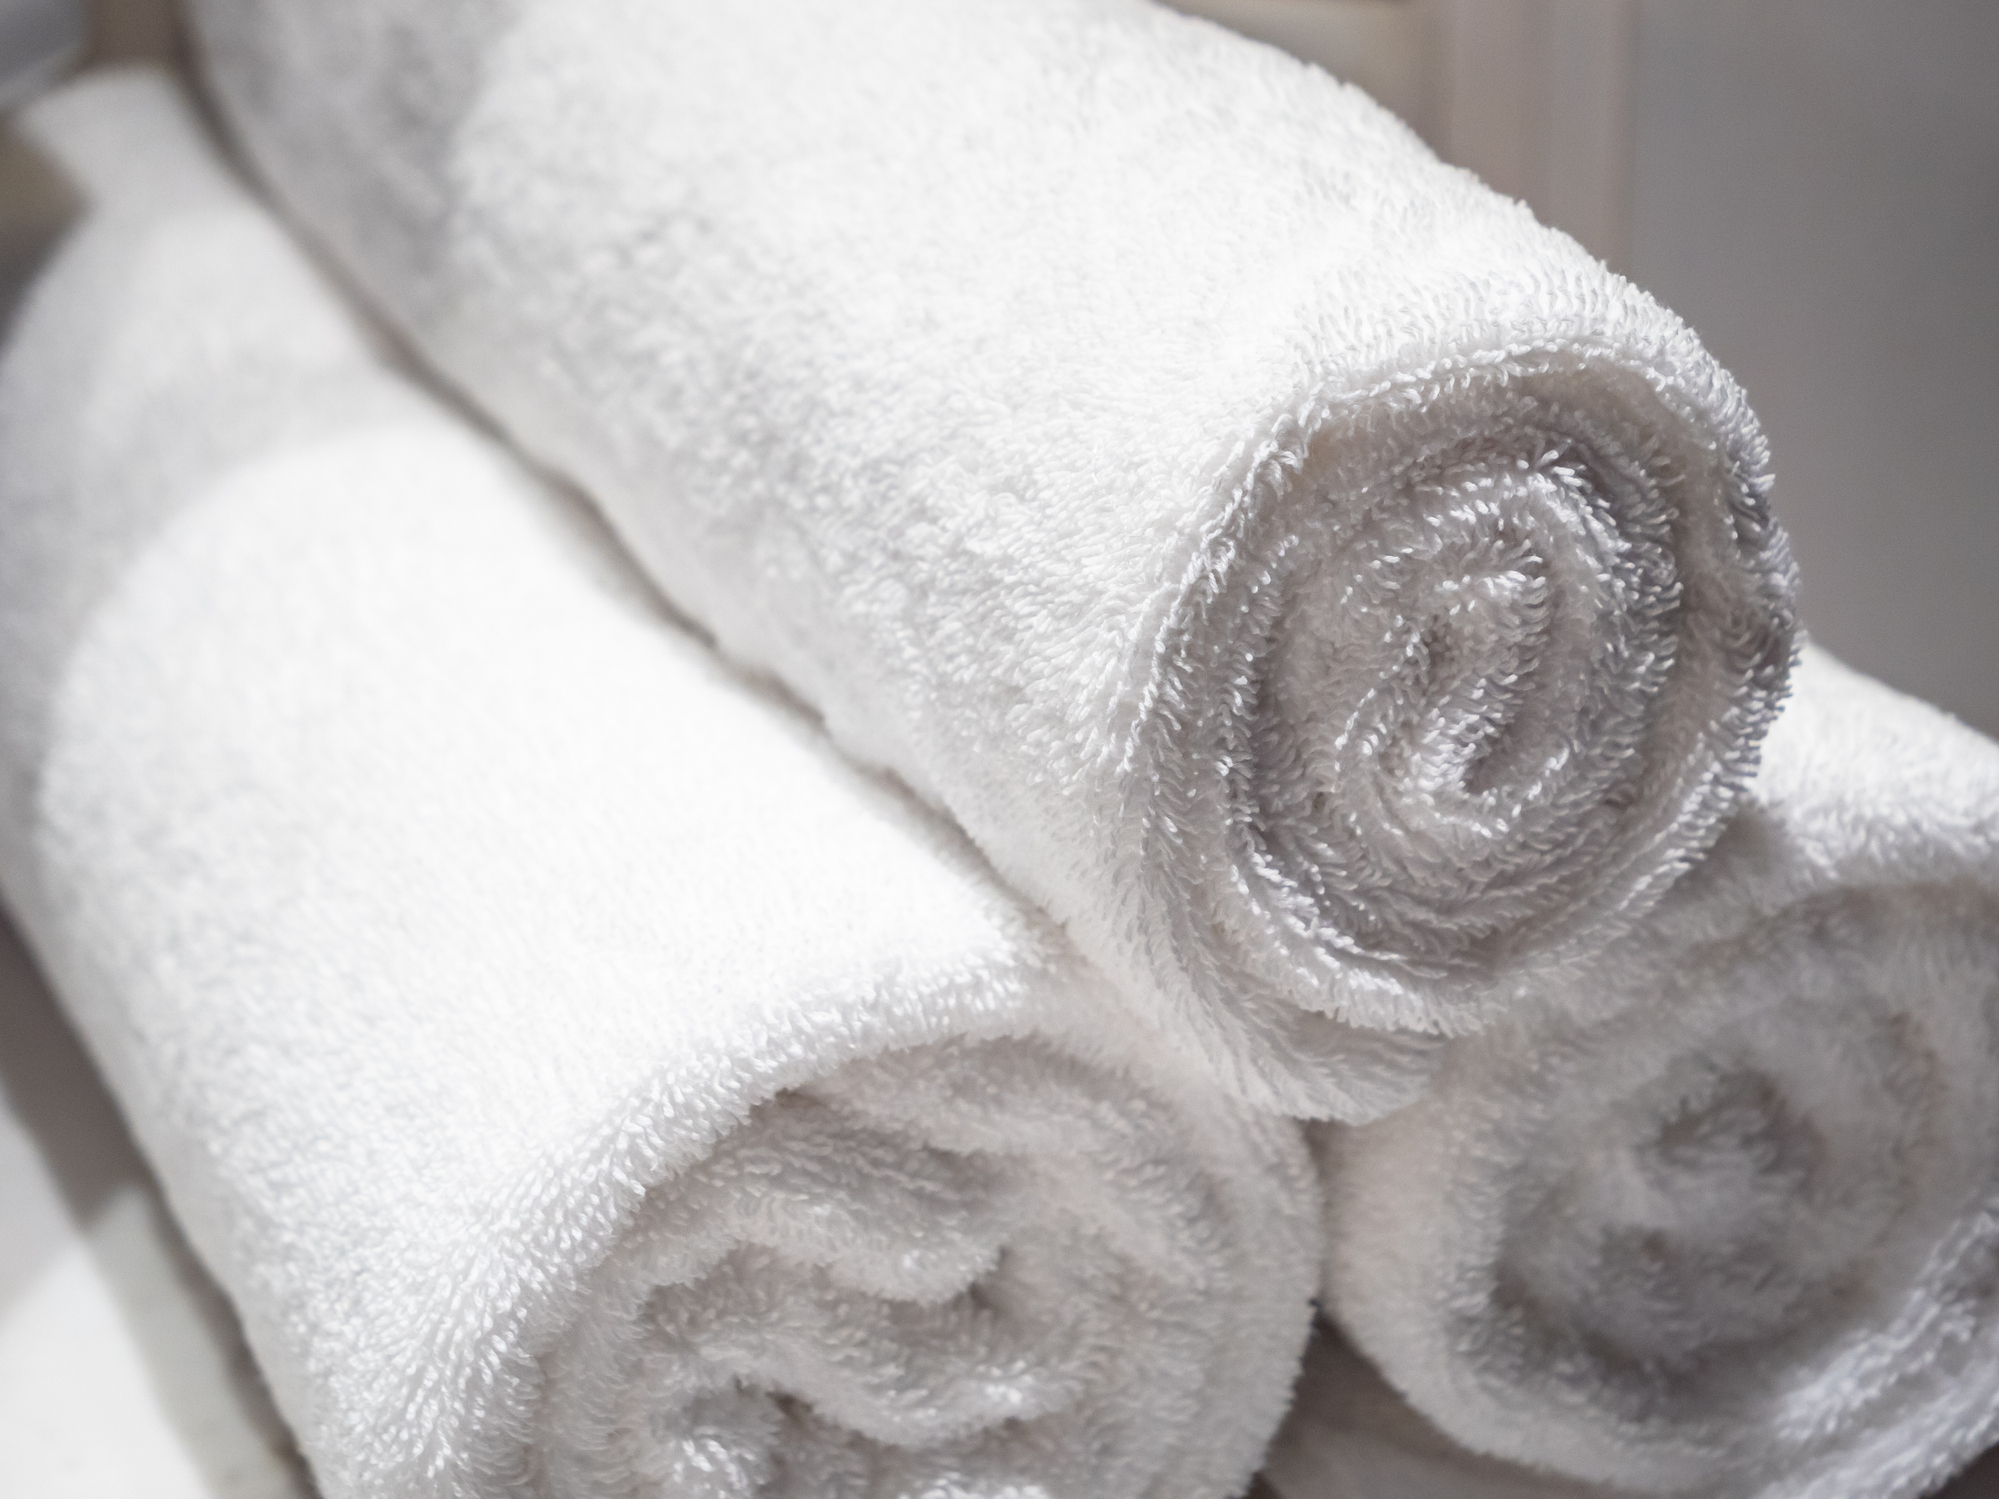 Rolled-up towels